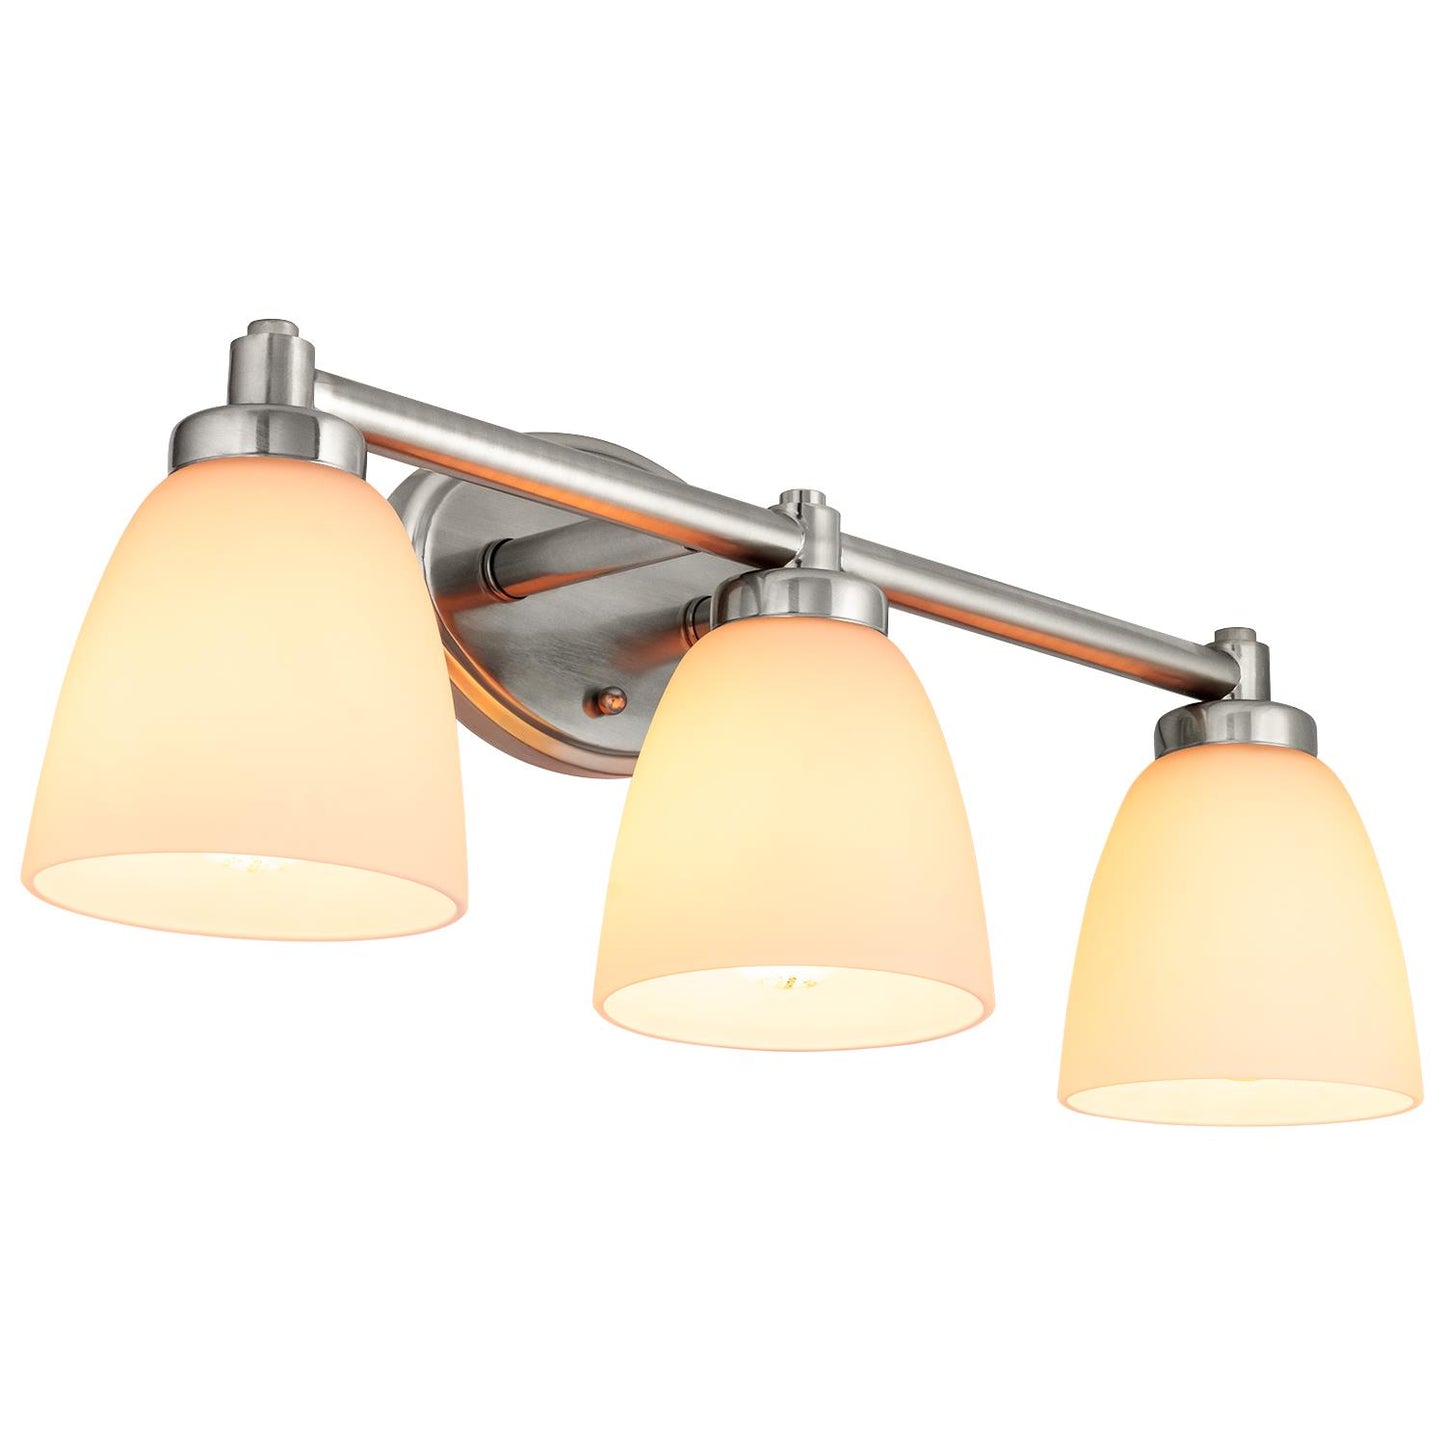 Sunlite 45059-SU Vanity Fixture Three Light 24 Inch Bar,  Bell Shaped Frosted Glass , Brushed Nickel Finish